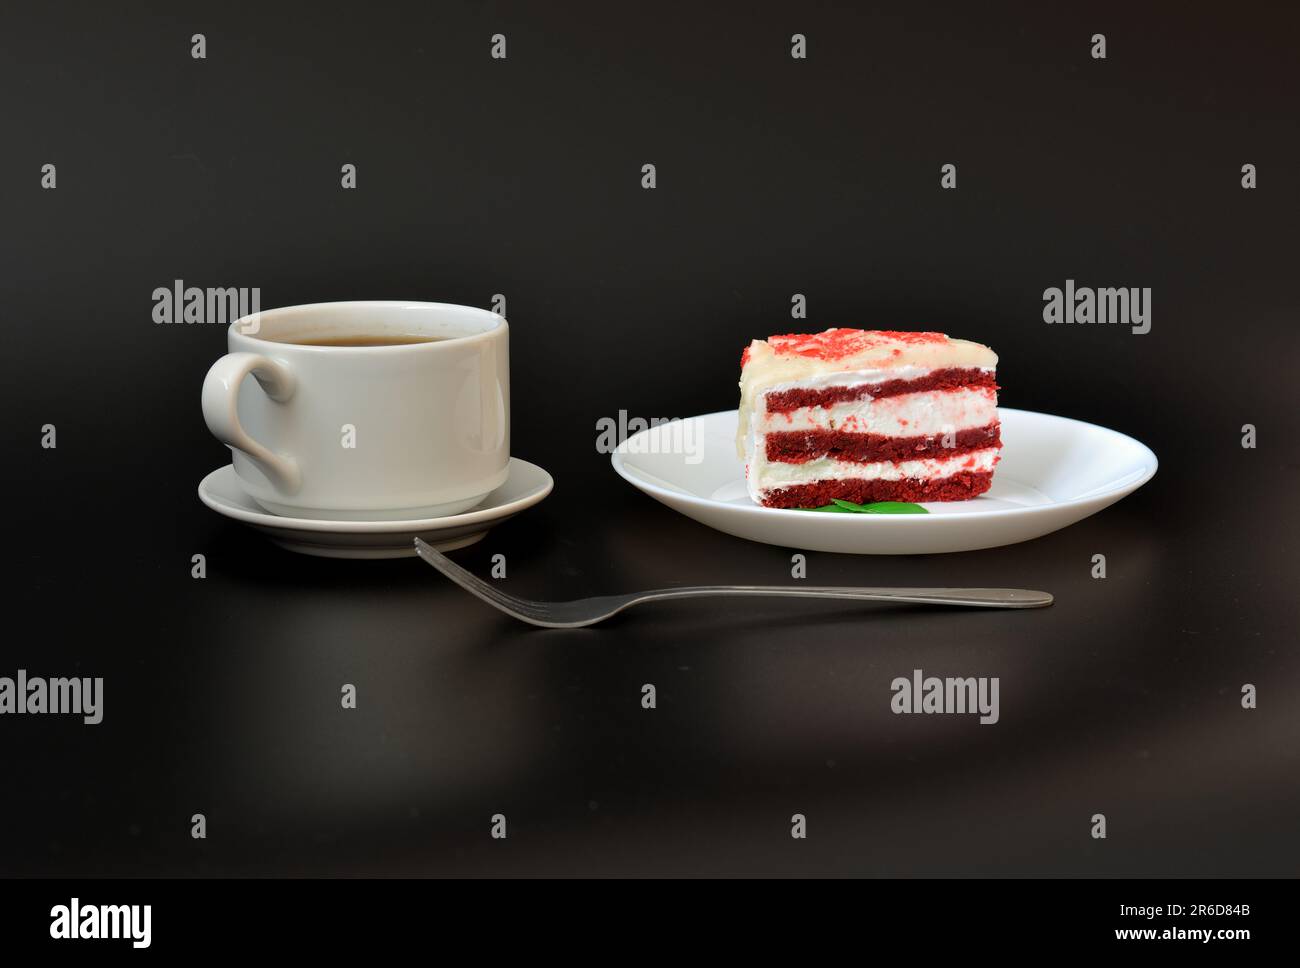 A cup of hot coffee on a saucer with a spoon and a plate with a slice of red velvet cake with mint leaves on a black background, next to a dessert for Stock Photo